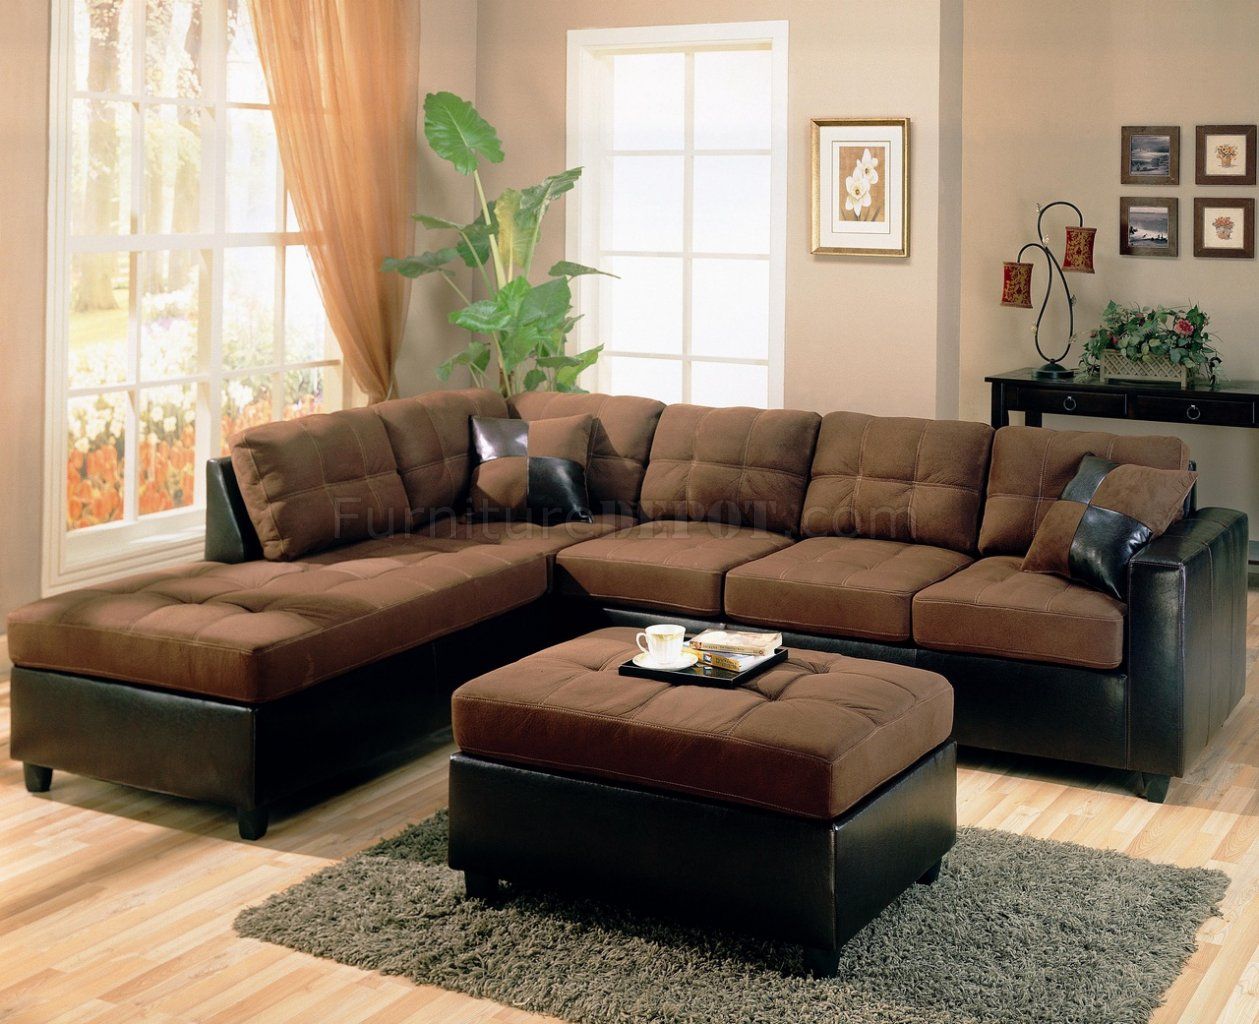 Two Tone Modern Sectional Sofa 500655 Chocolate/dark Brown Throughout 2 Tone Chocolate Microfiber Sofas (View 6 of 15)